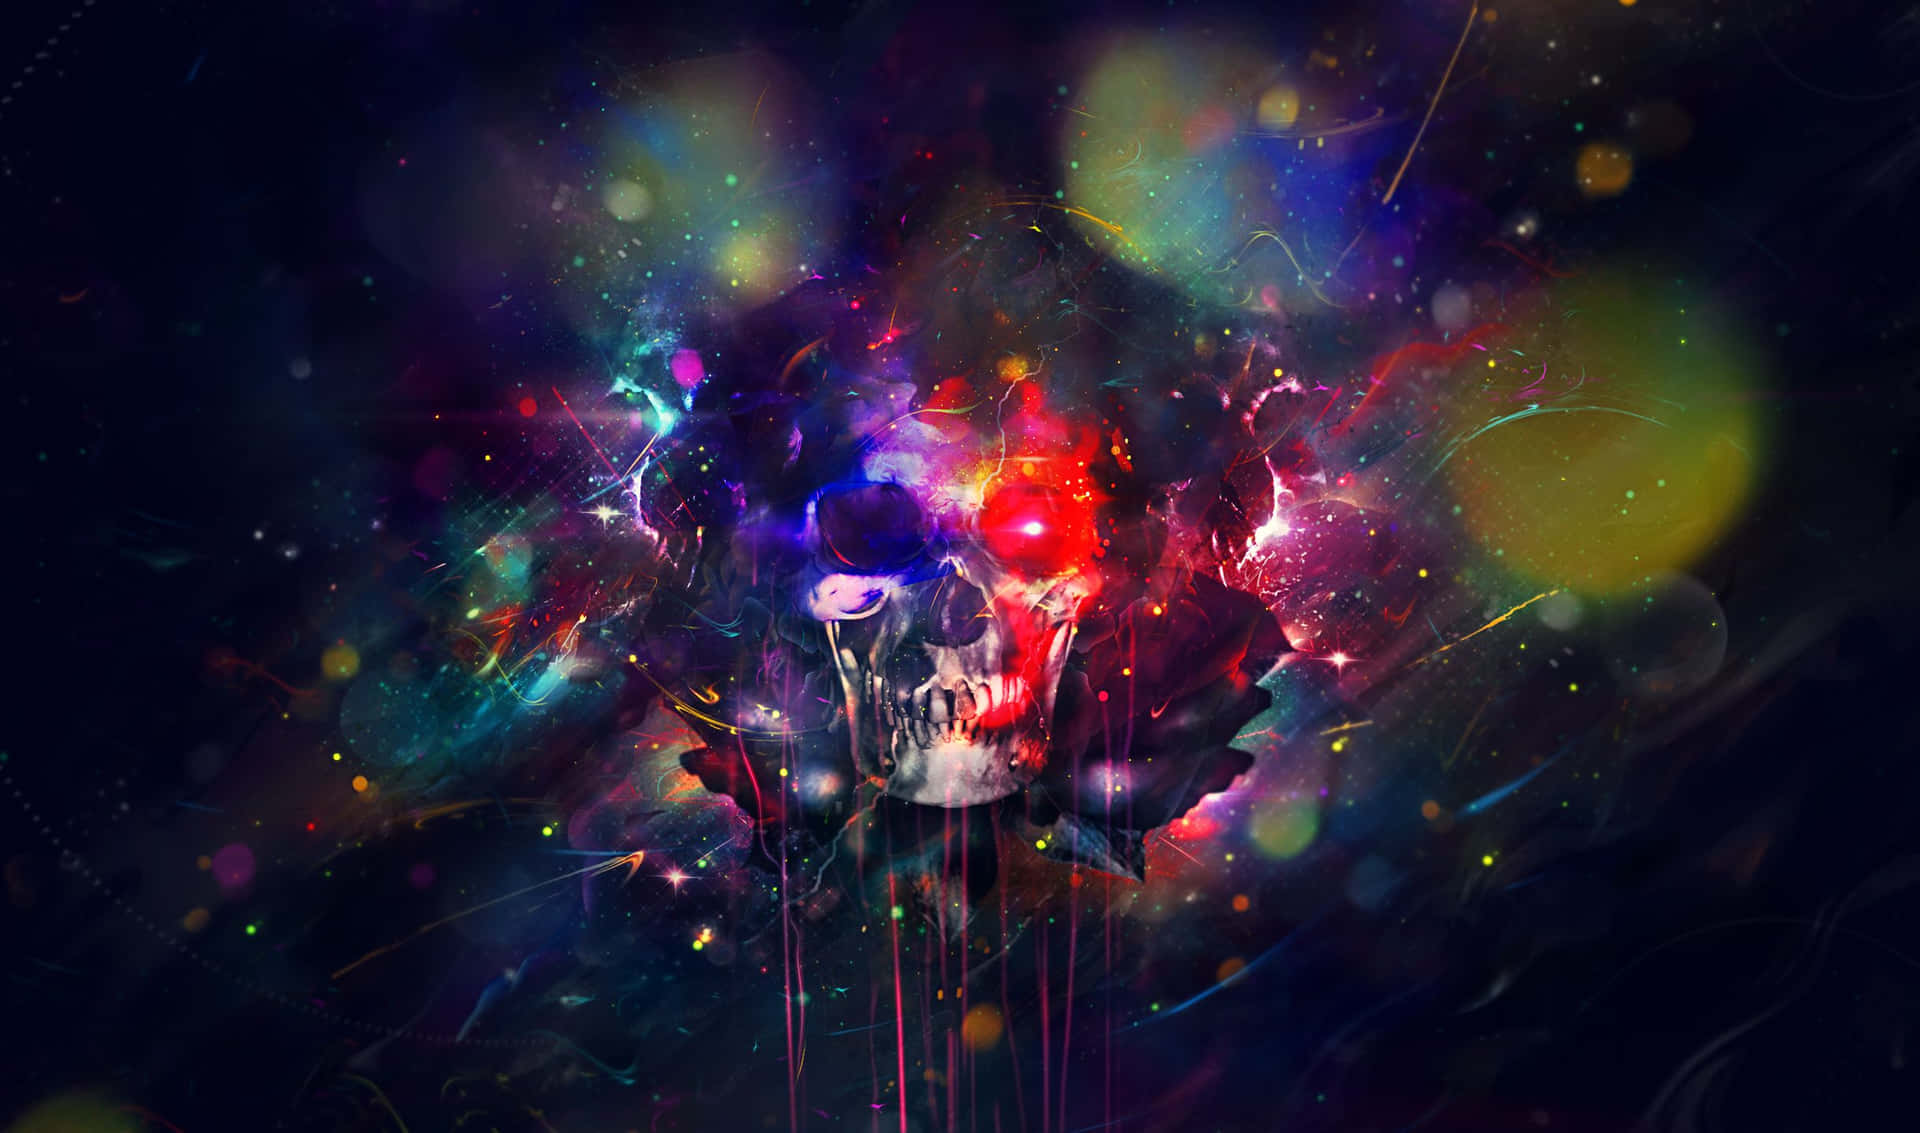 A Colorful Abstract Image Of A Skull